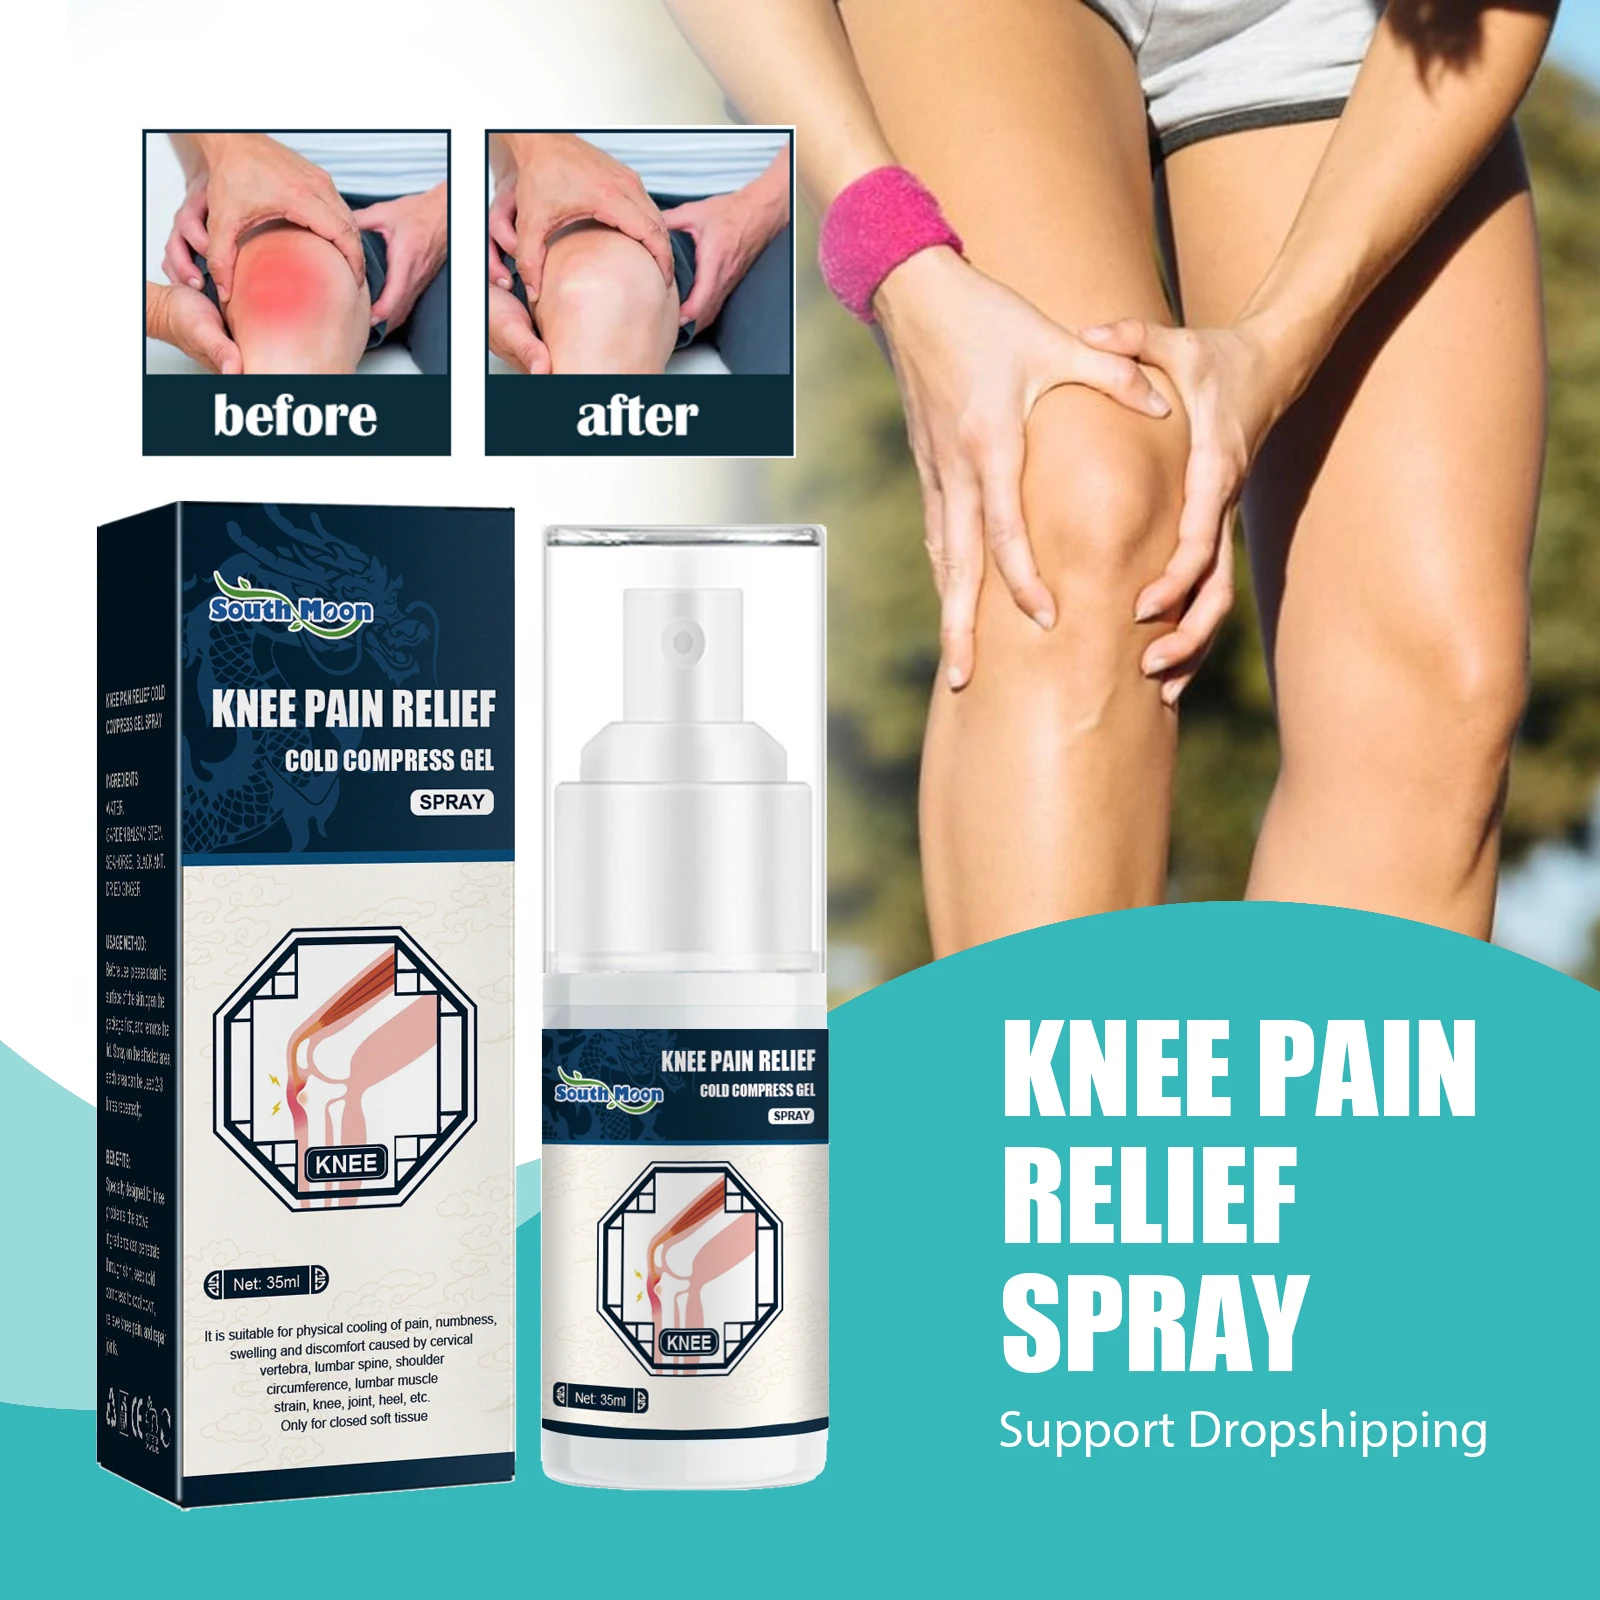 

South Moon Knee Joint Pain Relief Spray Cold Compress Lumber Spine Pain Muscle Ache Arthritis Treatment Spray Health Care 35ml